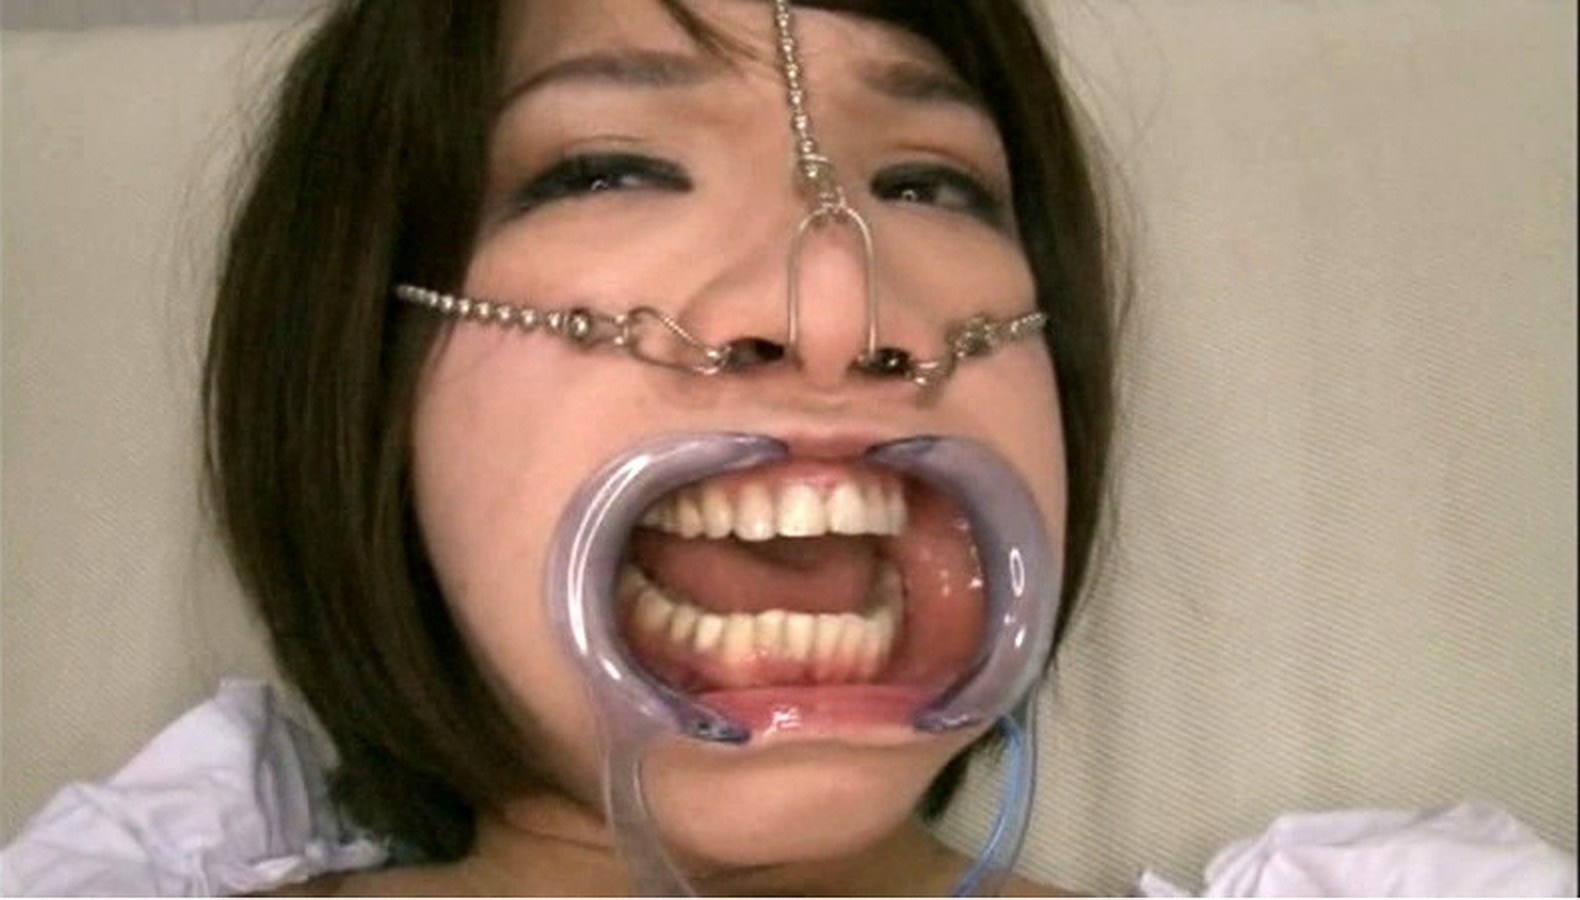 Asian Girl Mouth Gag - Redhead asian sub with mouth gag dominated - PornZog Free Porn Clips